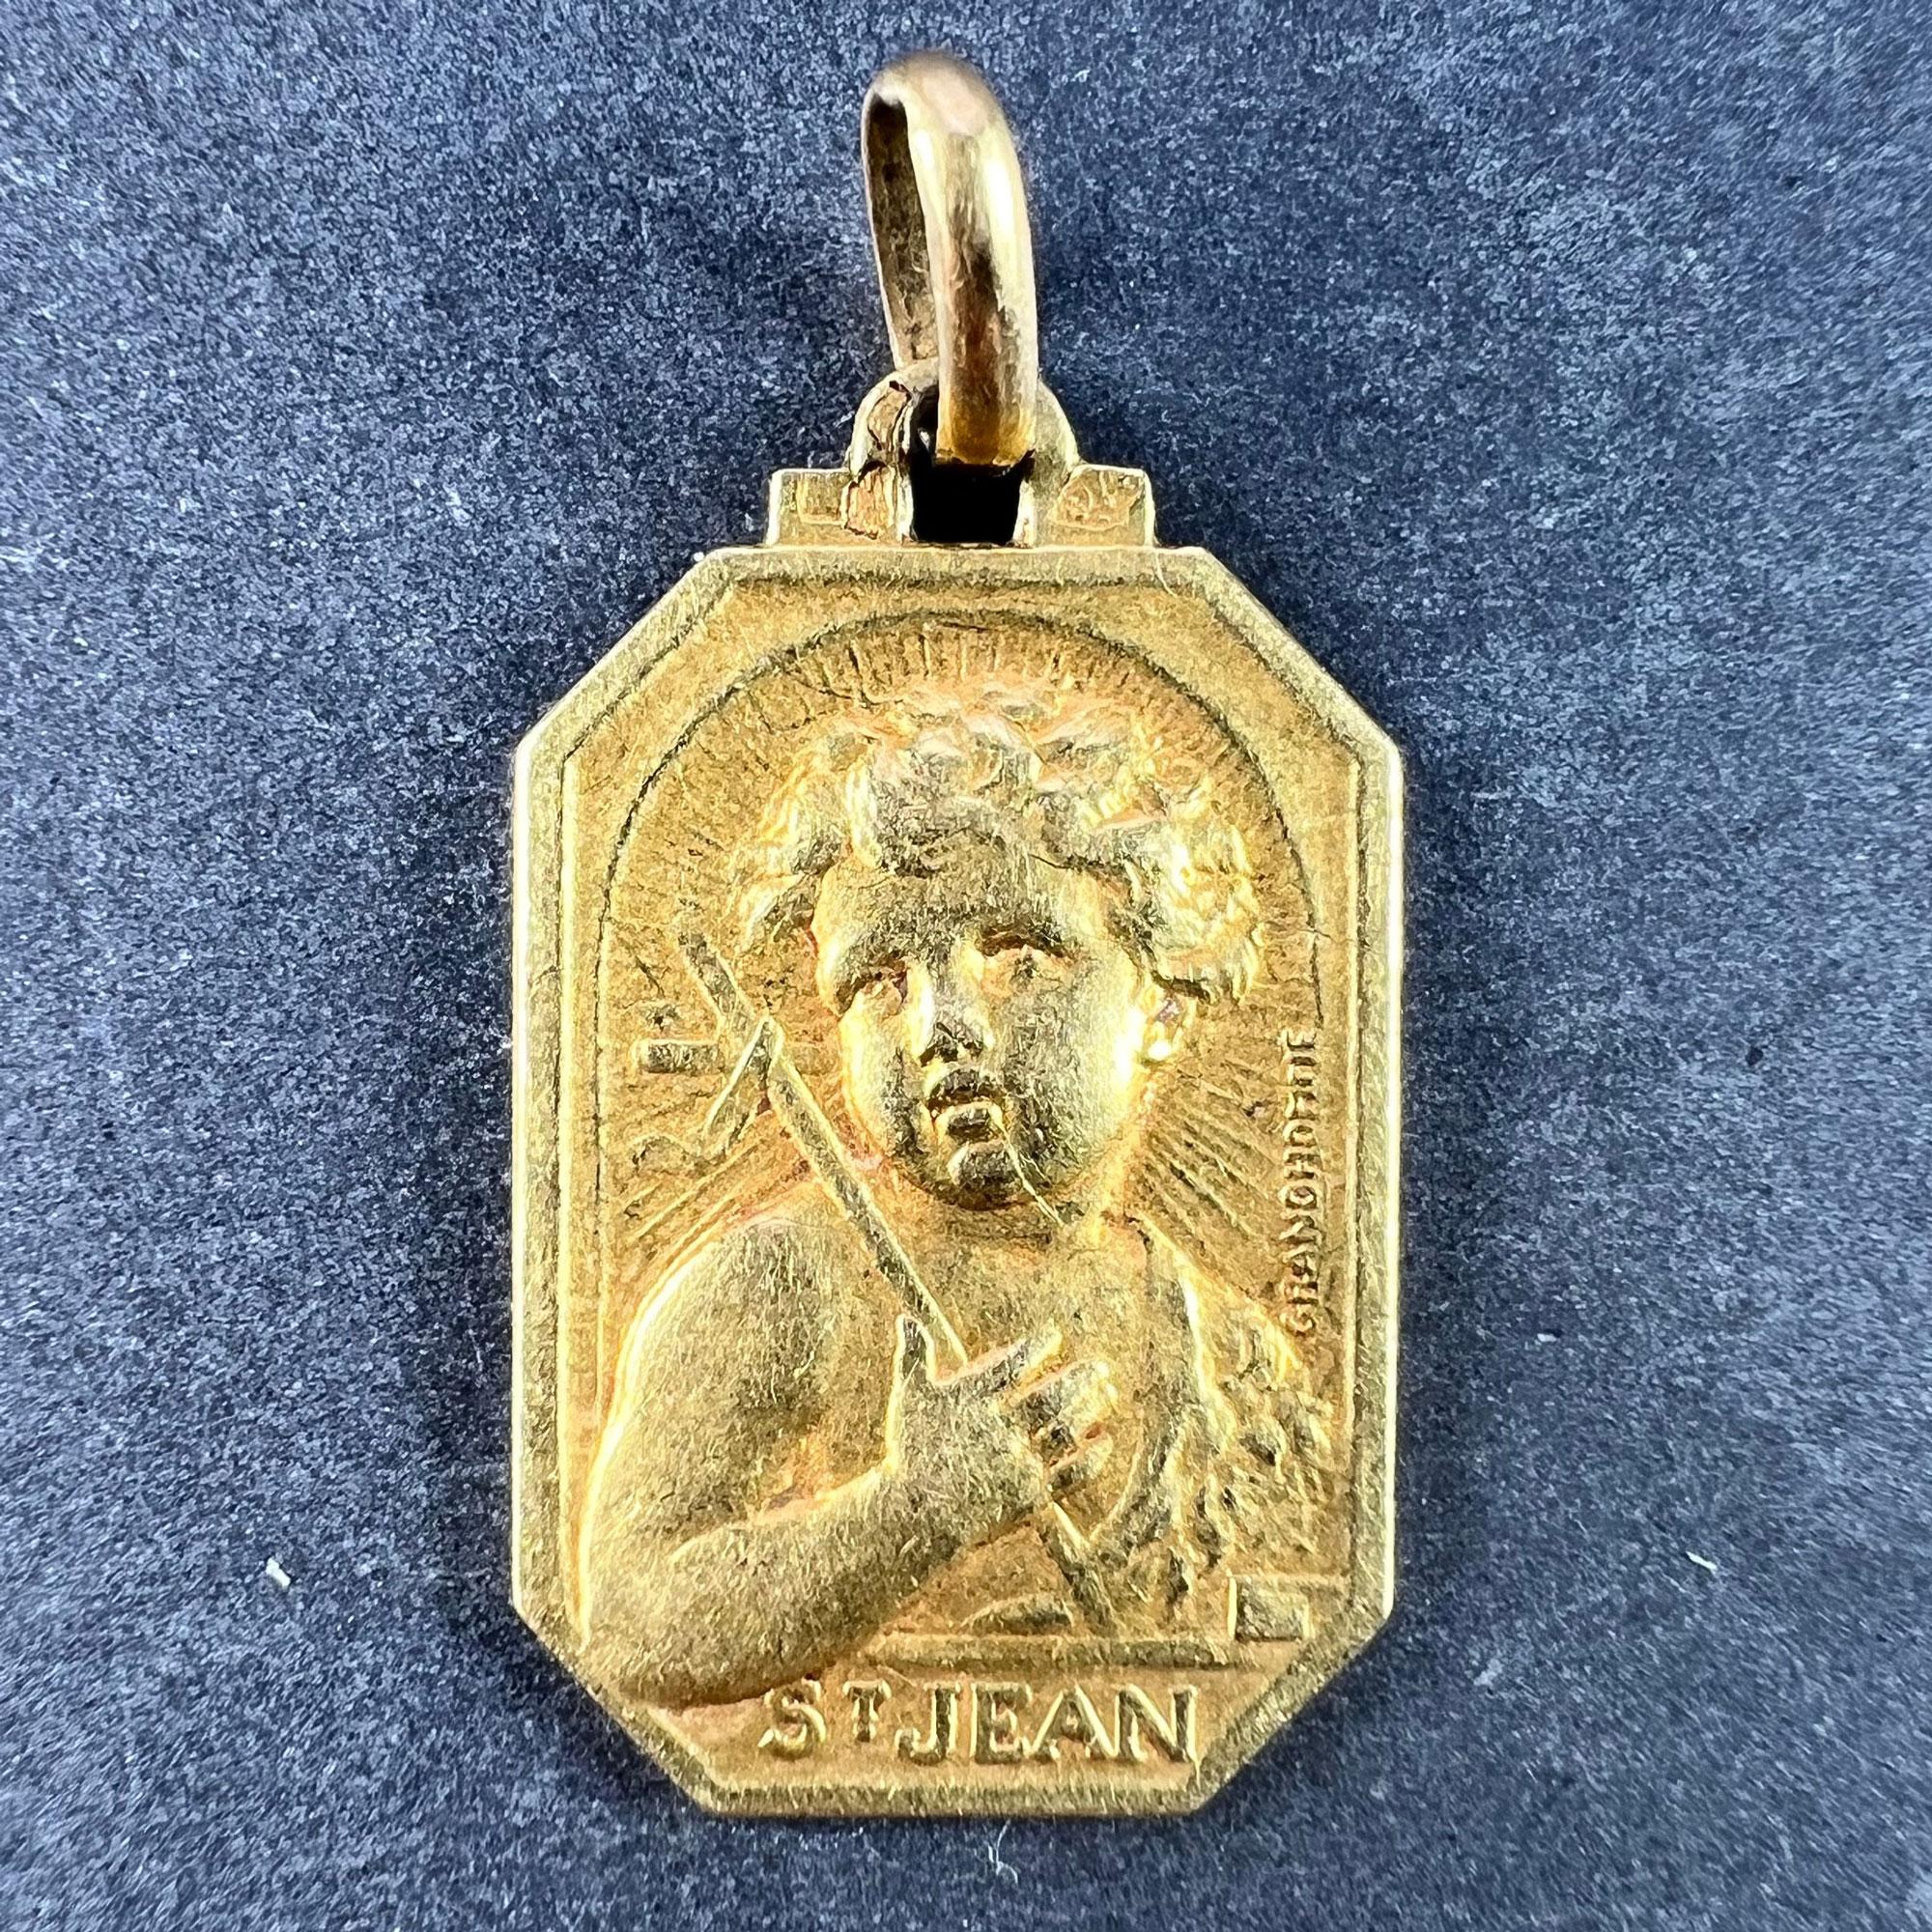 A French 18 karat (18K) yellow gold charm pendant designed as a medal representing Saint John the Baptist as a child with a lamb and a cross, with the name 'St Jean' below. Engraved to the reverse 'Jean-Pierre 11 Decembre 1942'. Signed Grandhomme,